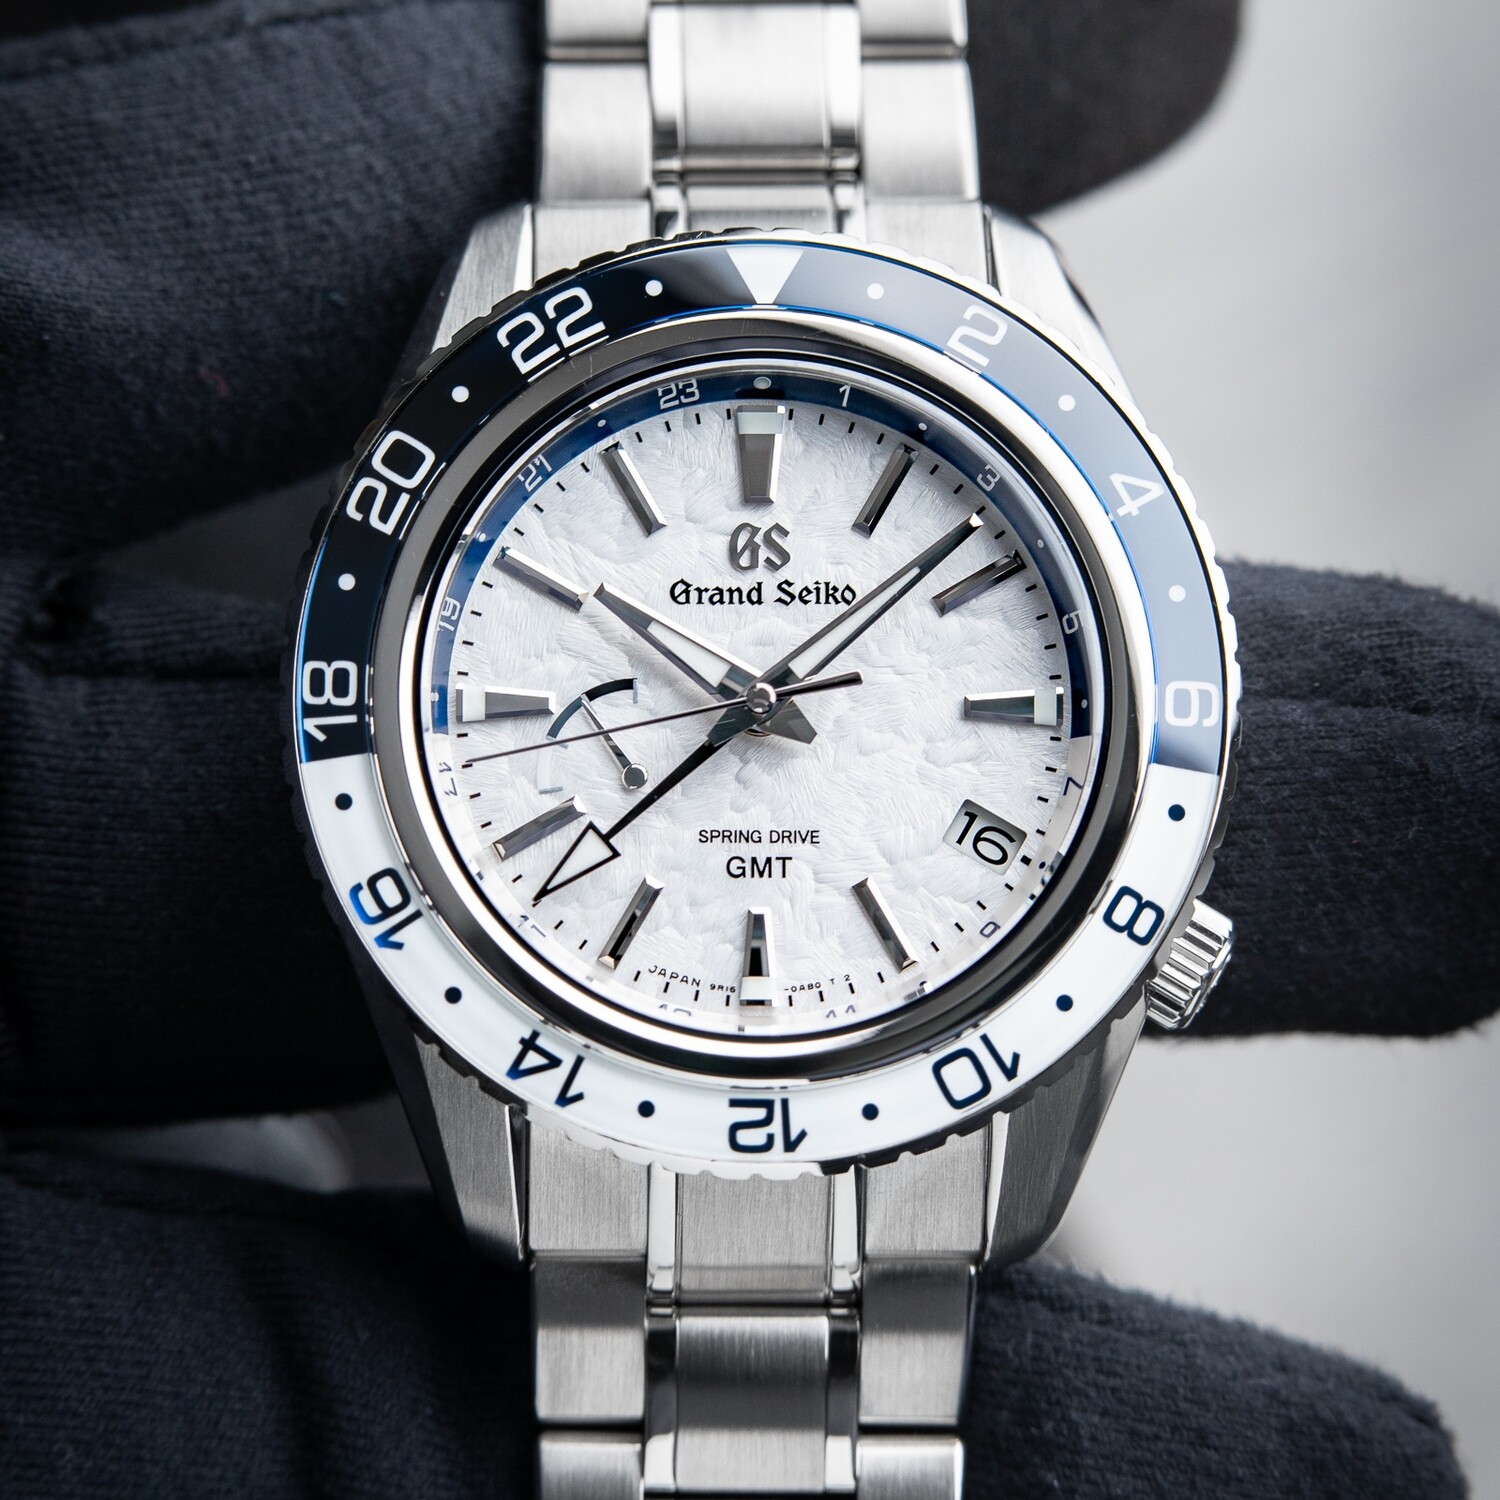 Grand Seiko Spring Drive Sport GMT Limited Edition "Iceman" 44mm